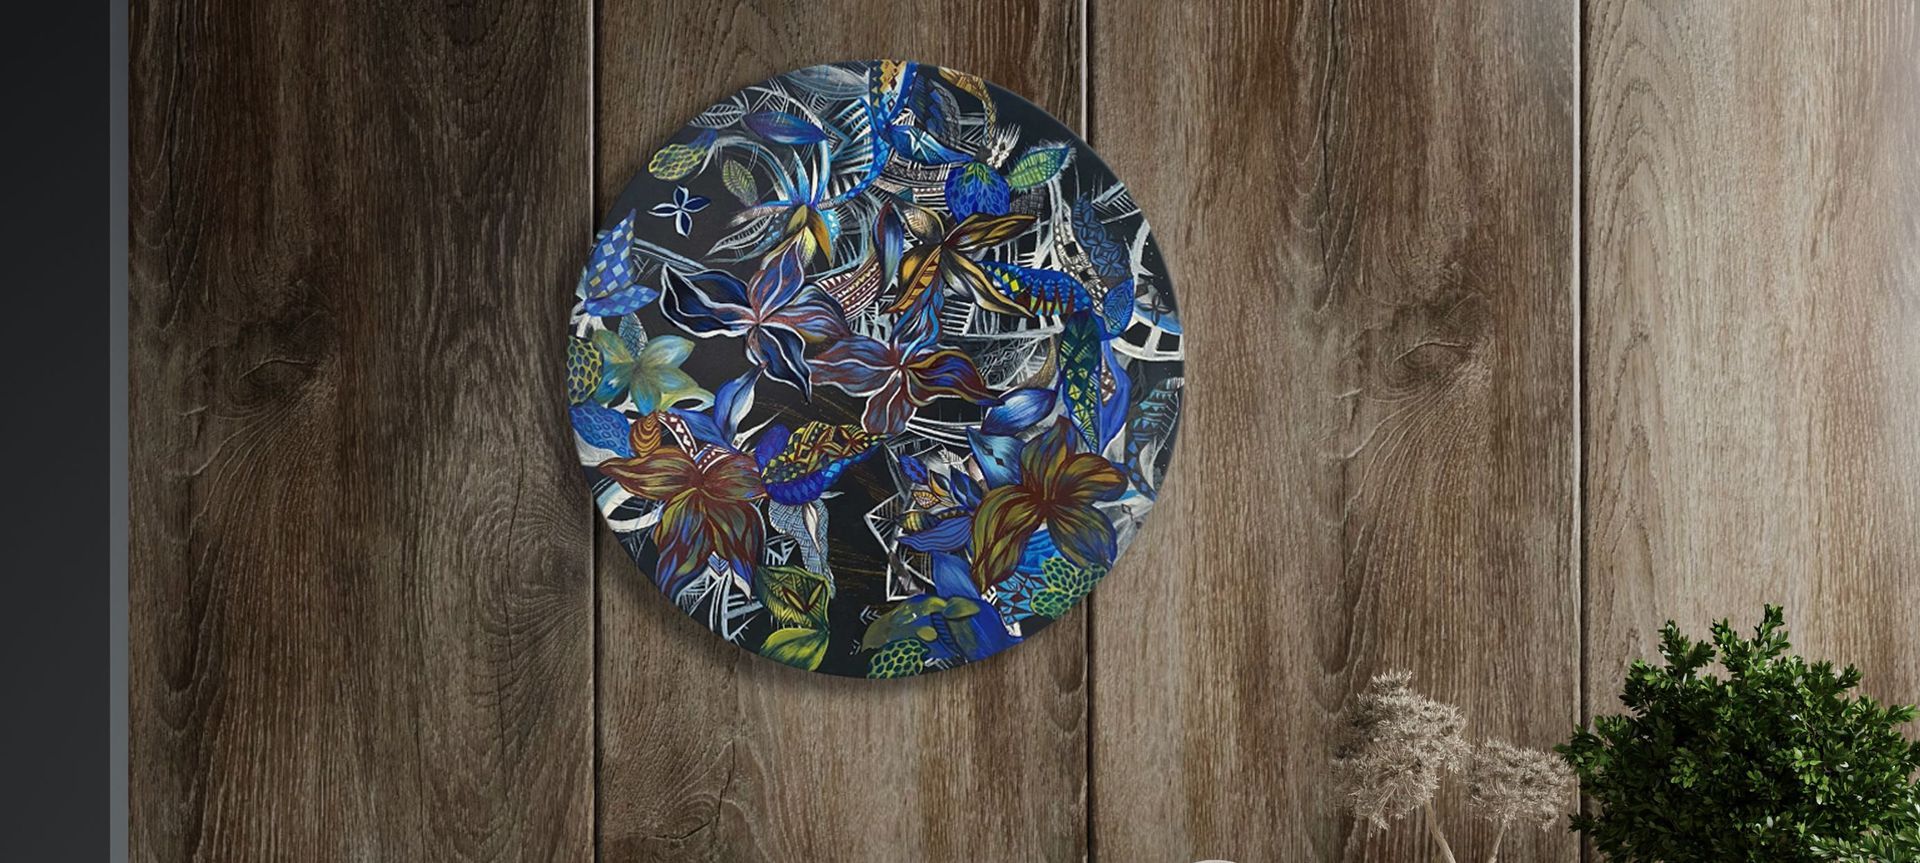 NEPUTINA blends flora designs with Samoan Tatau symbols, using moody blue tones and inspired by Neptune's energies. The painting is on round canvas board using acrylic and ink.